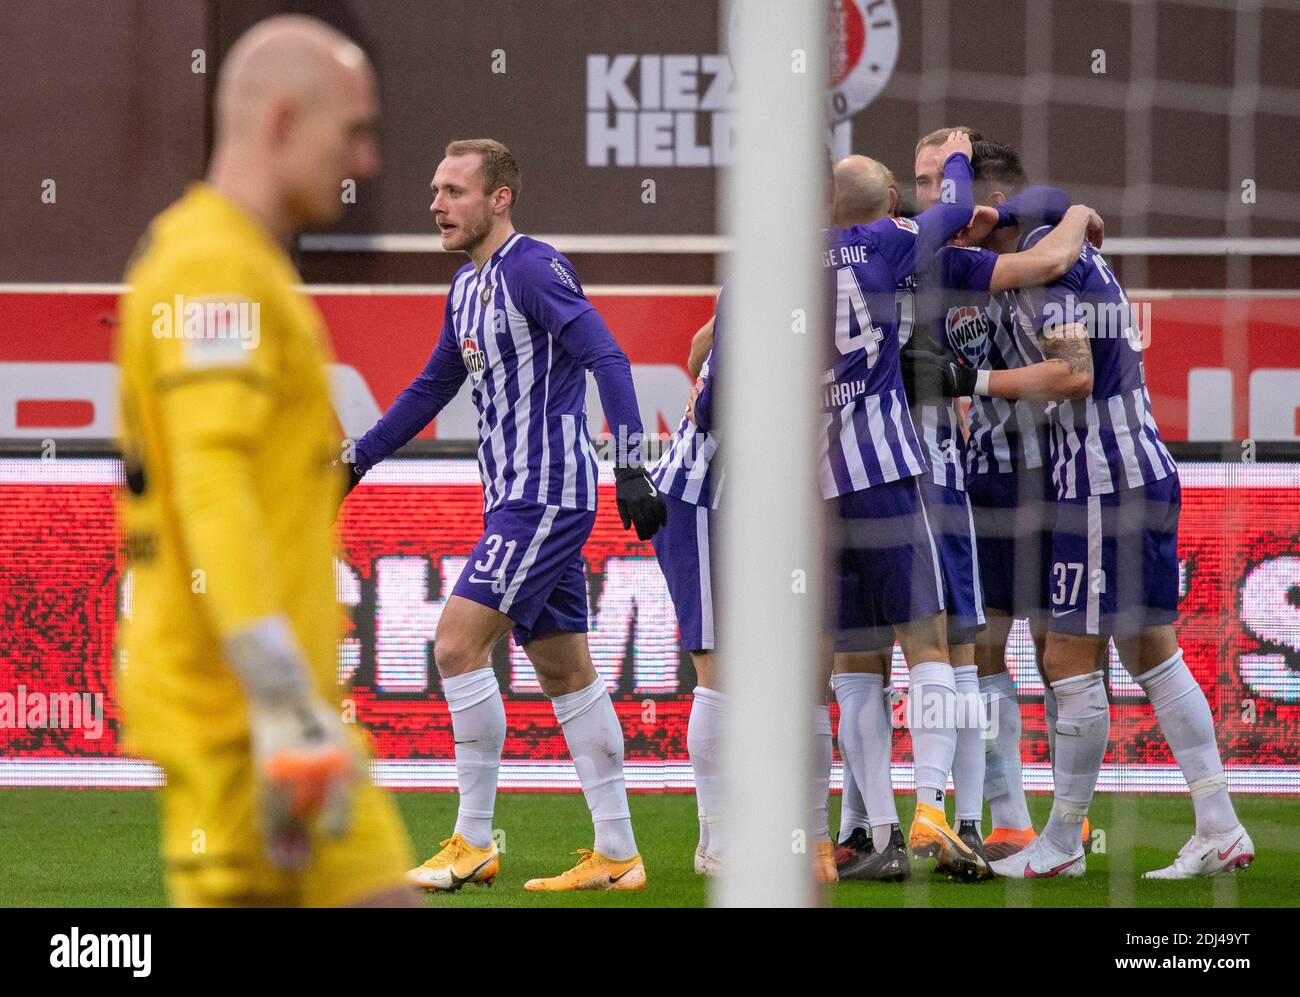 Hamburg, Germany. 13th Dec, 2020. Football: 2nd Bundesliga, FC St. Pauli - Erzgebirge Aue, 11th matchday. Aue's players celebrate the goal for 0:1 Credit: Axel Heimken/dpa - IMPORTANT NOTE: In accordance with the regulations of the DFL Deutsche Fußball Liga and the DFB Deutscher Fußball-Bund, it is prohibited to exploit or have exploited in the stadium and/or from the game taken photographs in the form of sequence images and/or video-like photo series./dpa/Alamy Live News Stock Photo